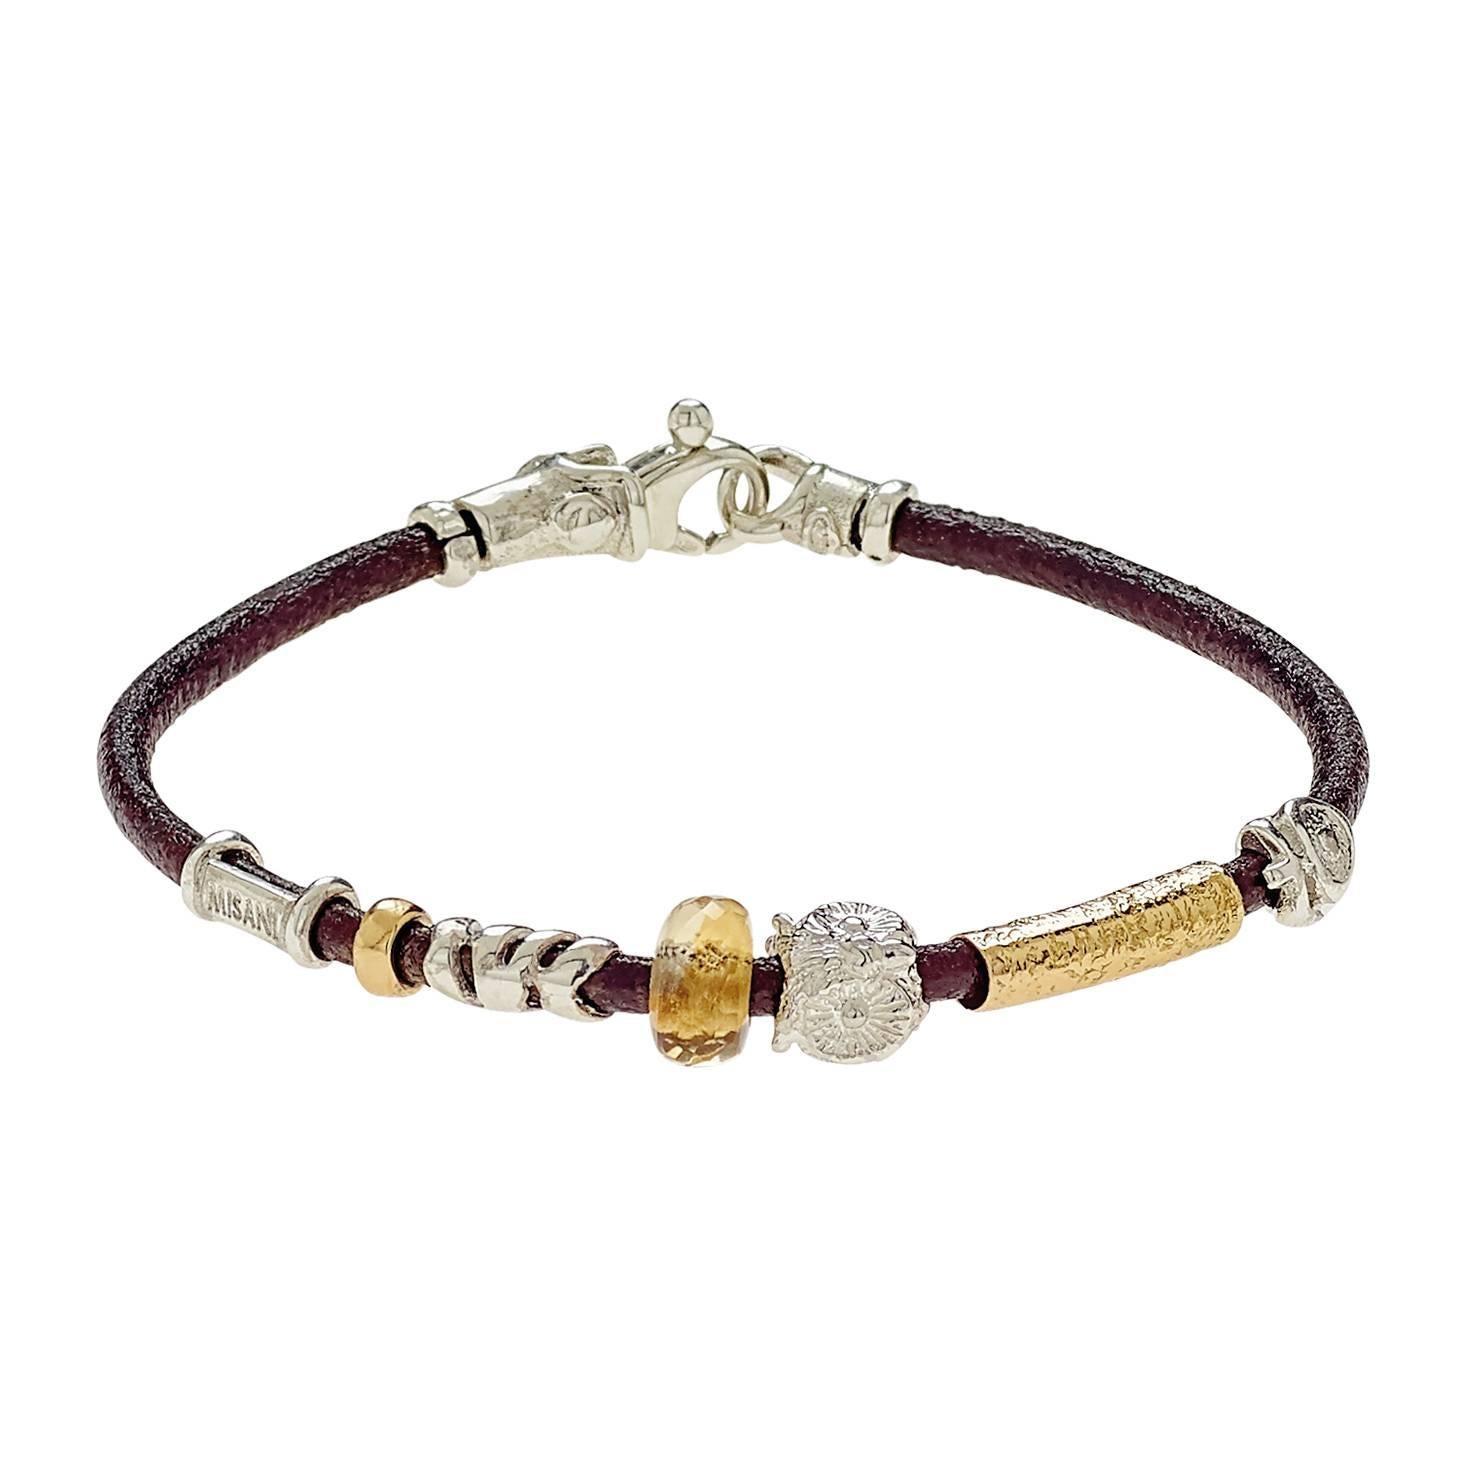 Women's or Men's Leather Bracelet with Gold and Silver Elements and Semi Precious Stones For Sale